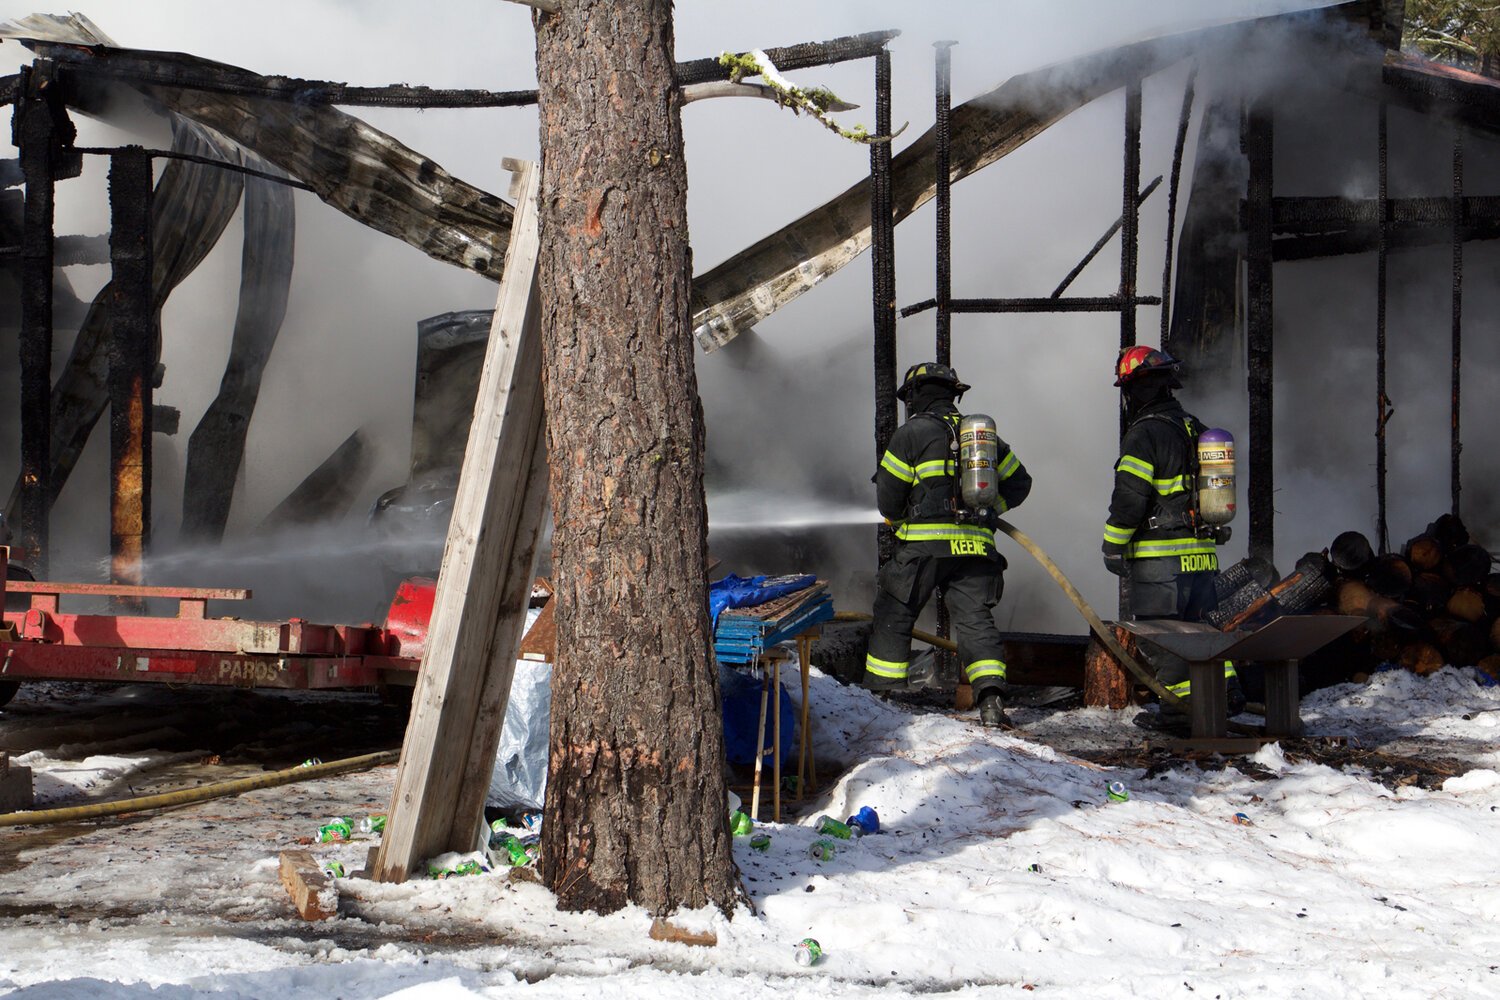 Firefighter Keene (left) and Lt. Rodman (right) control fire and hot spots located at the front of a garage in Union Valley, Tuesday, Feb. 20.